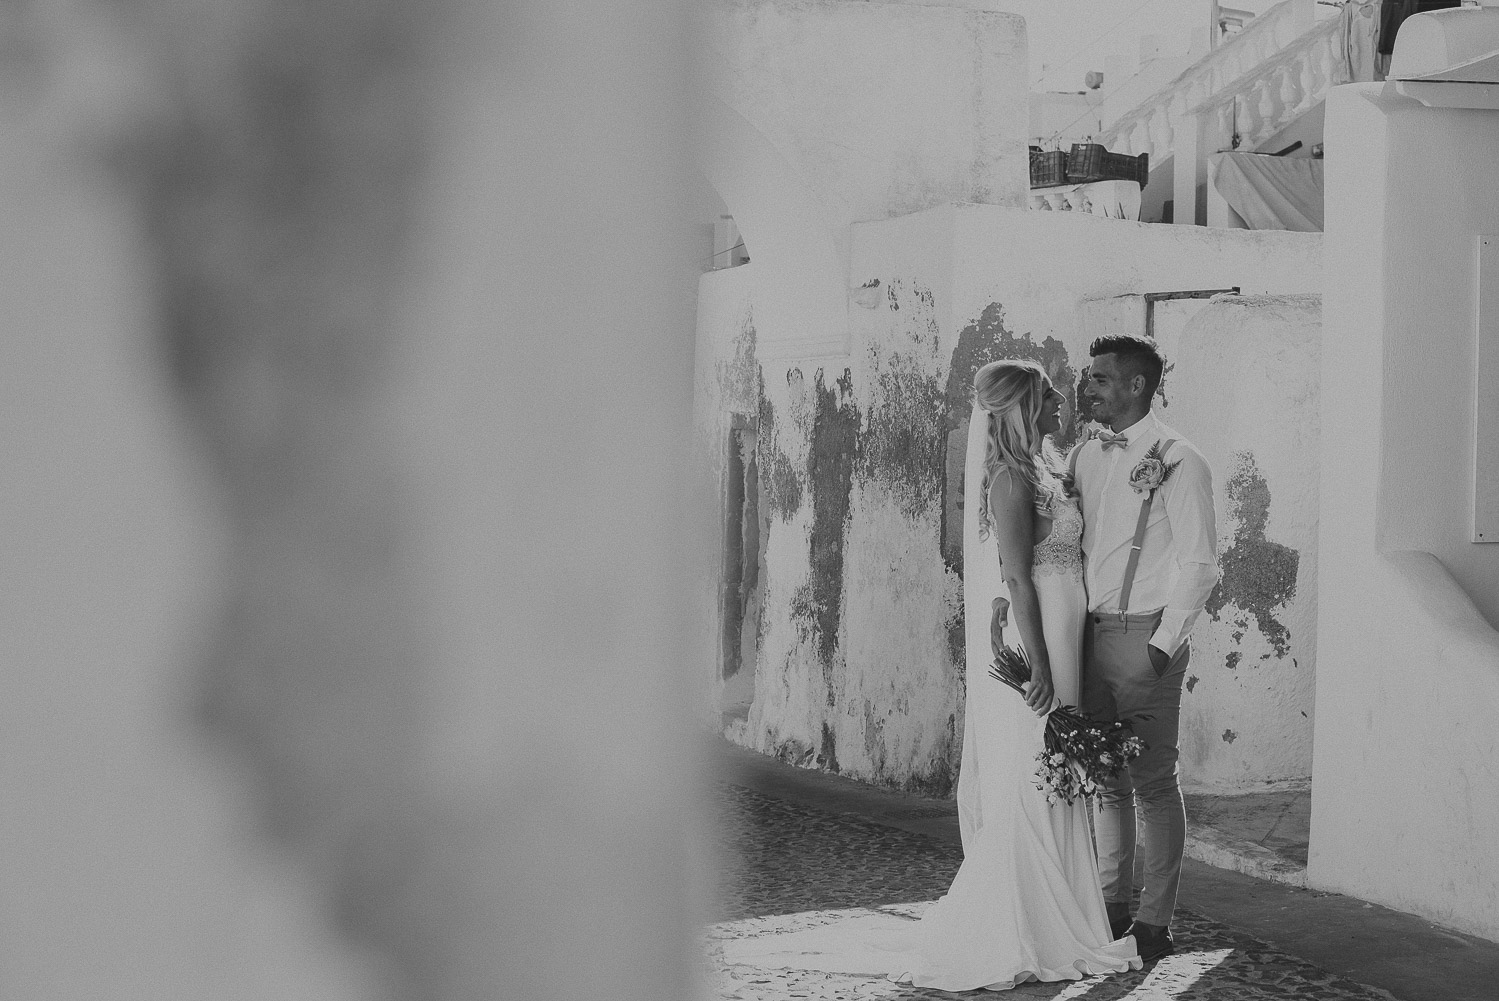 Wedding photographer Santorini: black and white photo of bride and groom against rustic walls standing on cobbled stone street by Ben and Vesna.